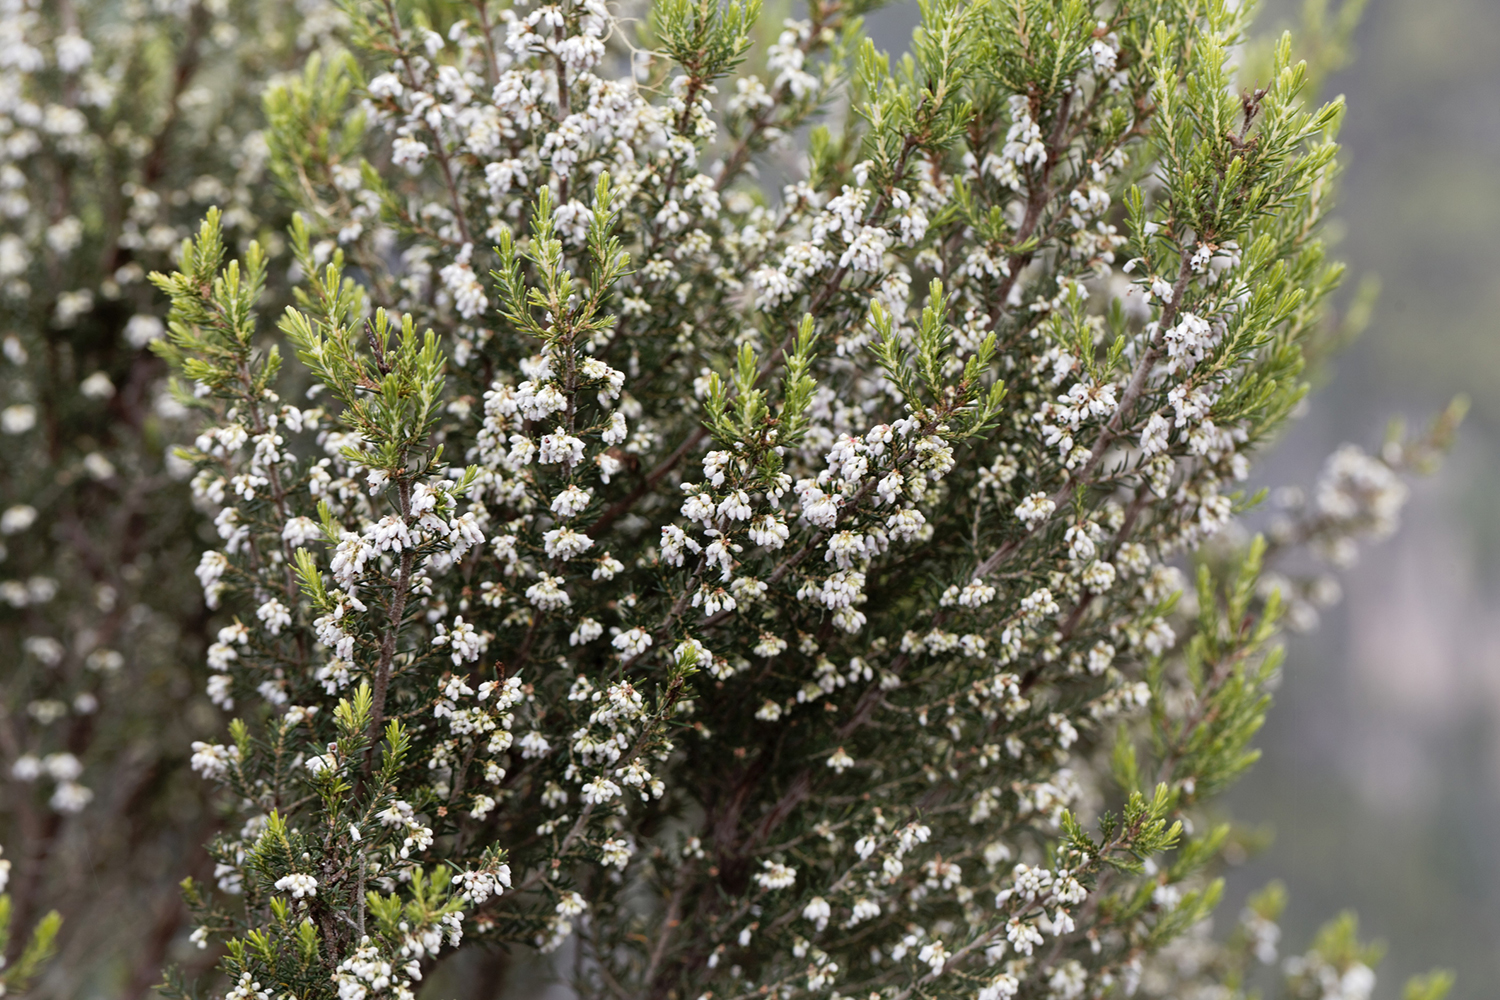 Flowers of a giant heather tree, Erica arborea, in the Simien Mountains in Ethiopia.